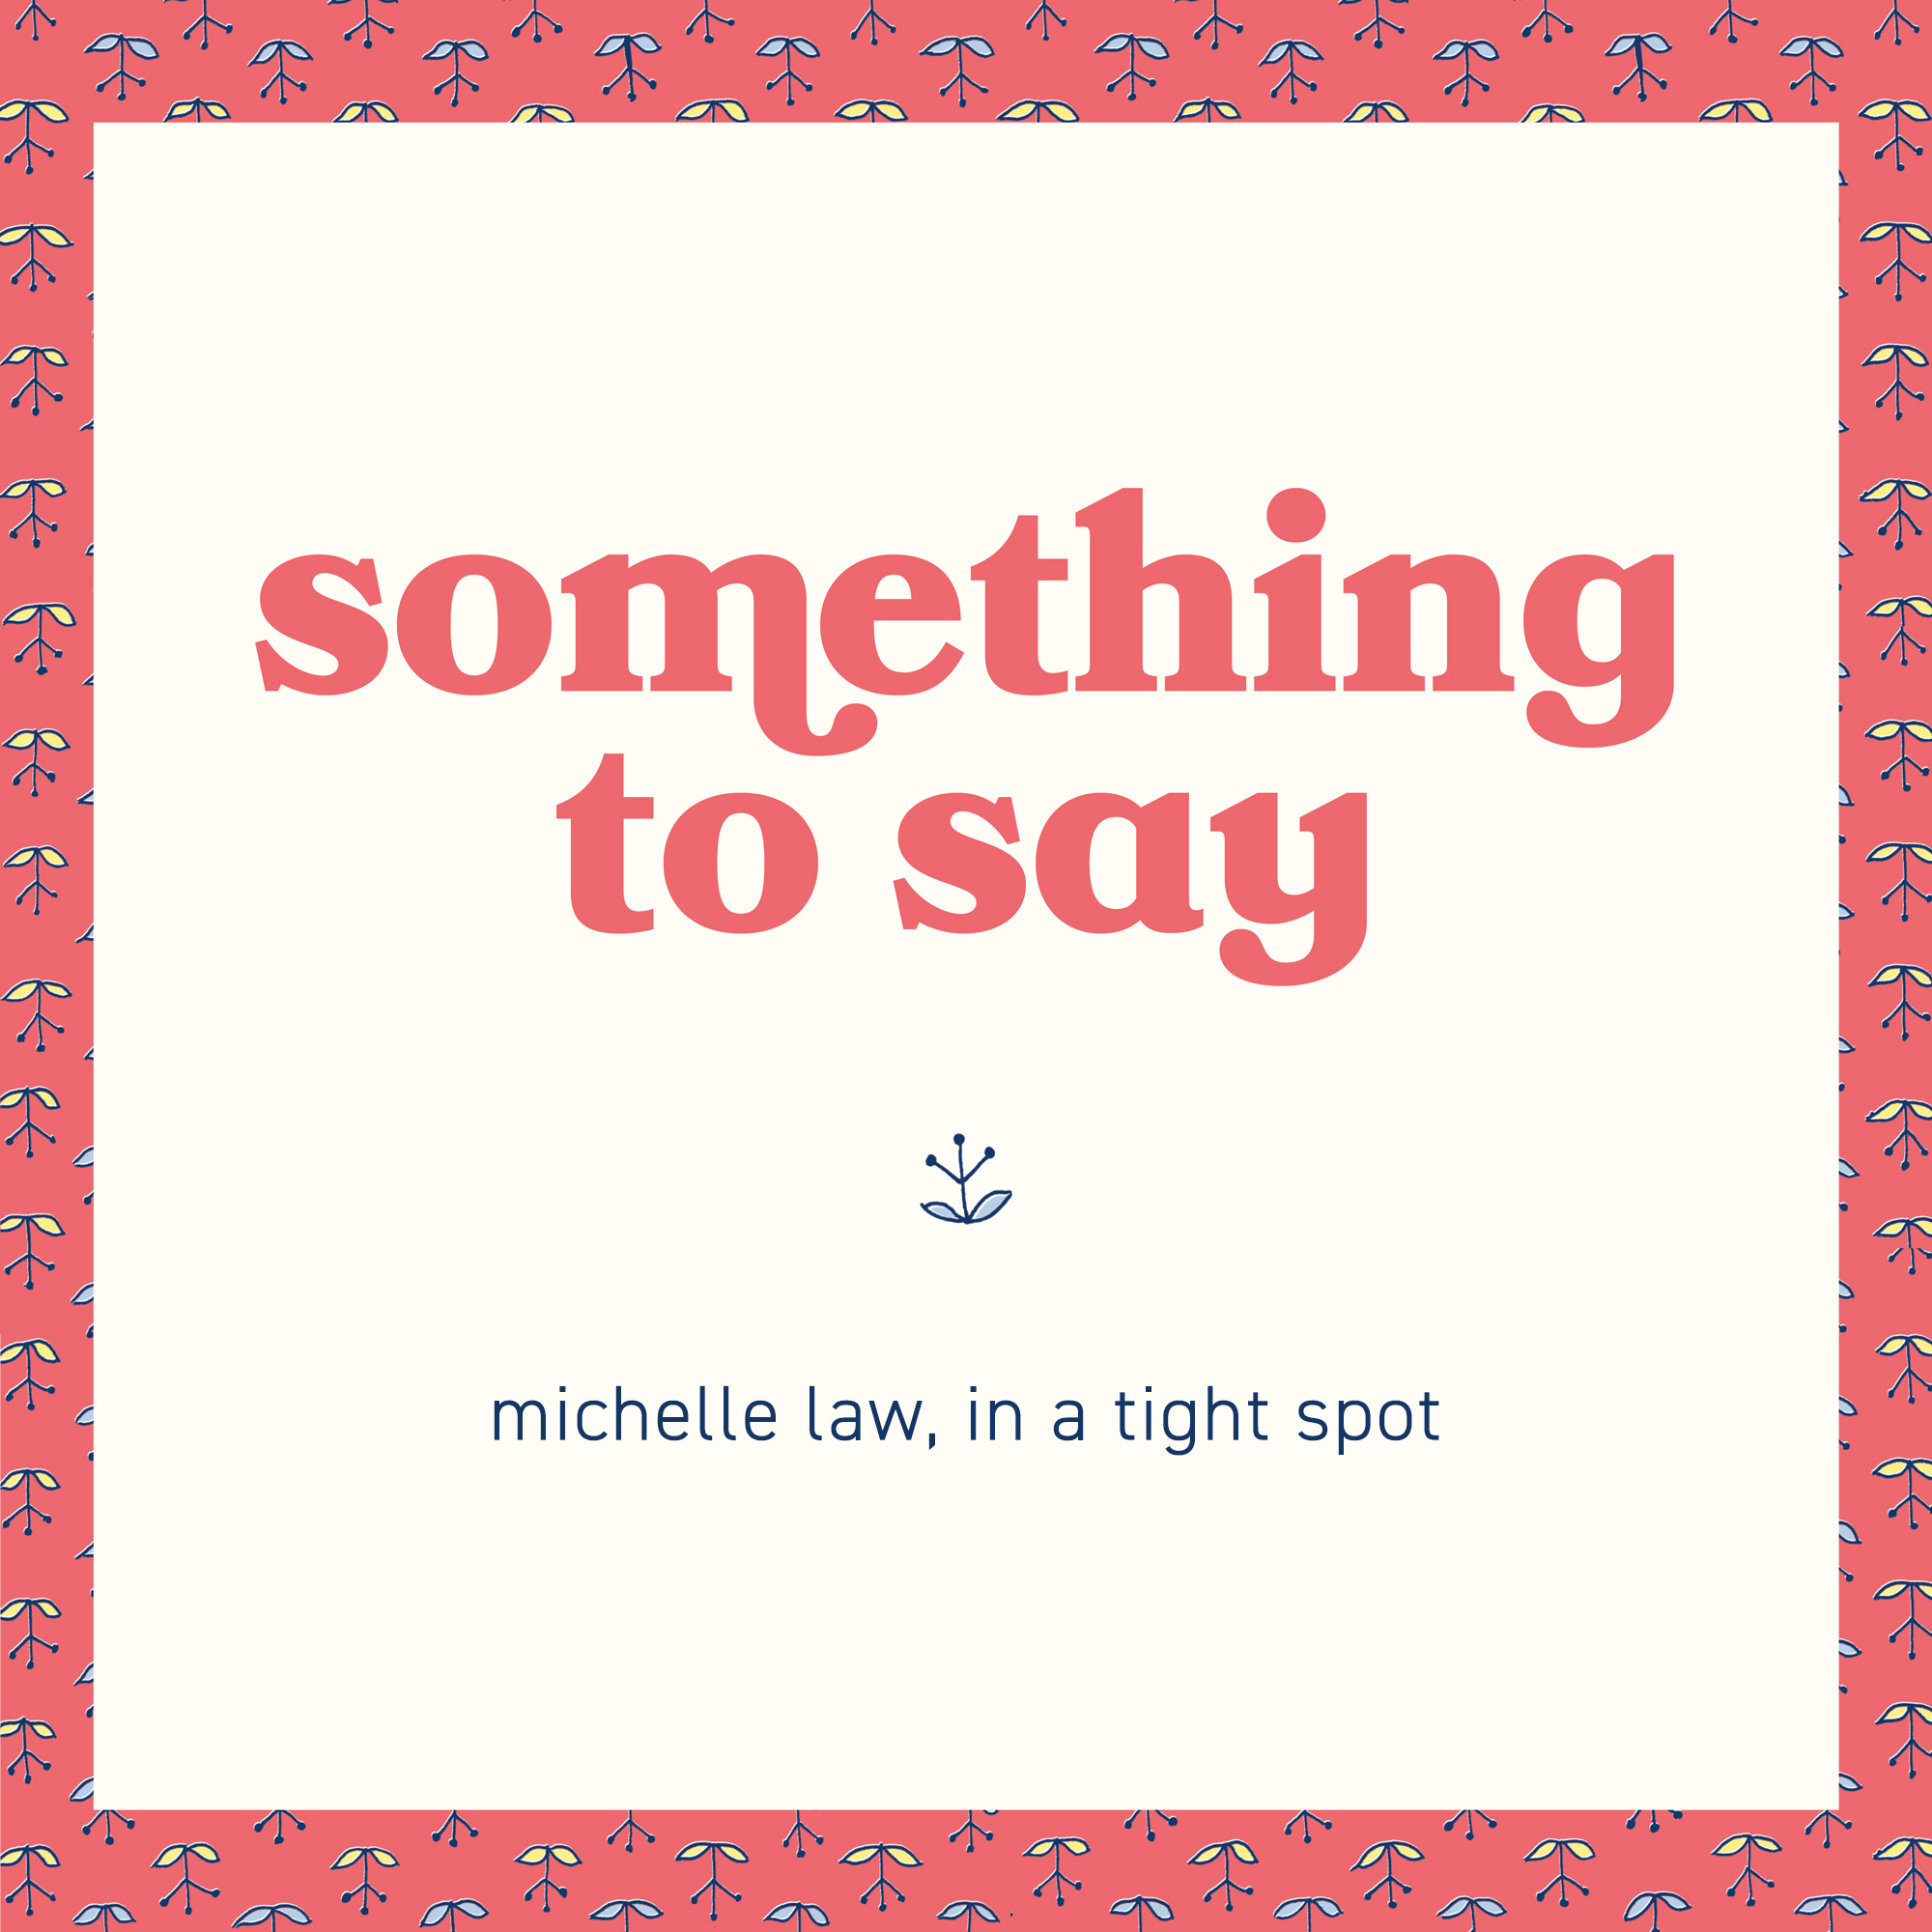 something to say - michelle law, in a tight spot